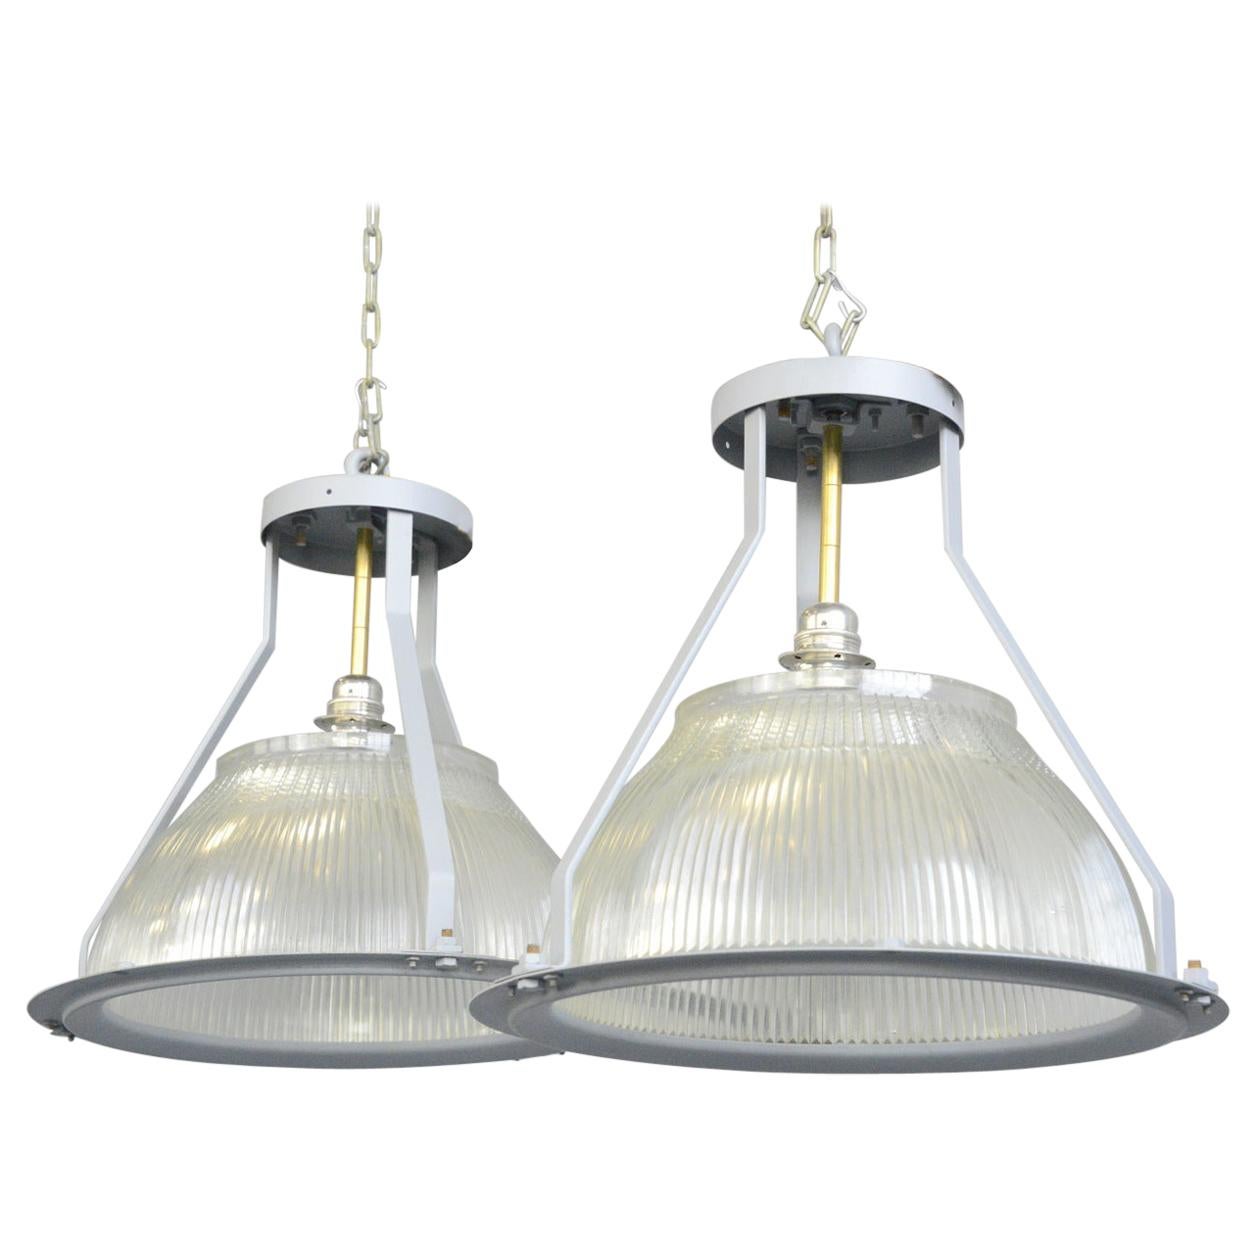 Large Aircraft Hanger Lights by Holophane, circa 1940s